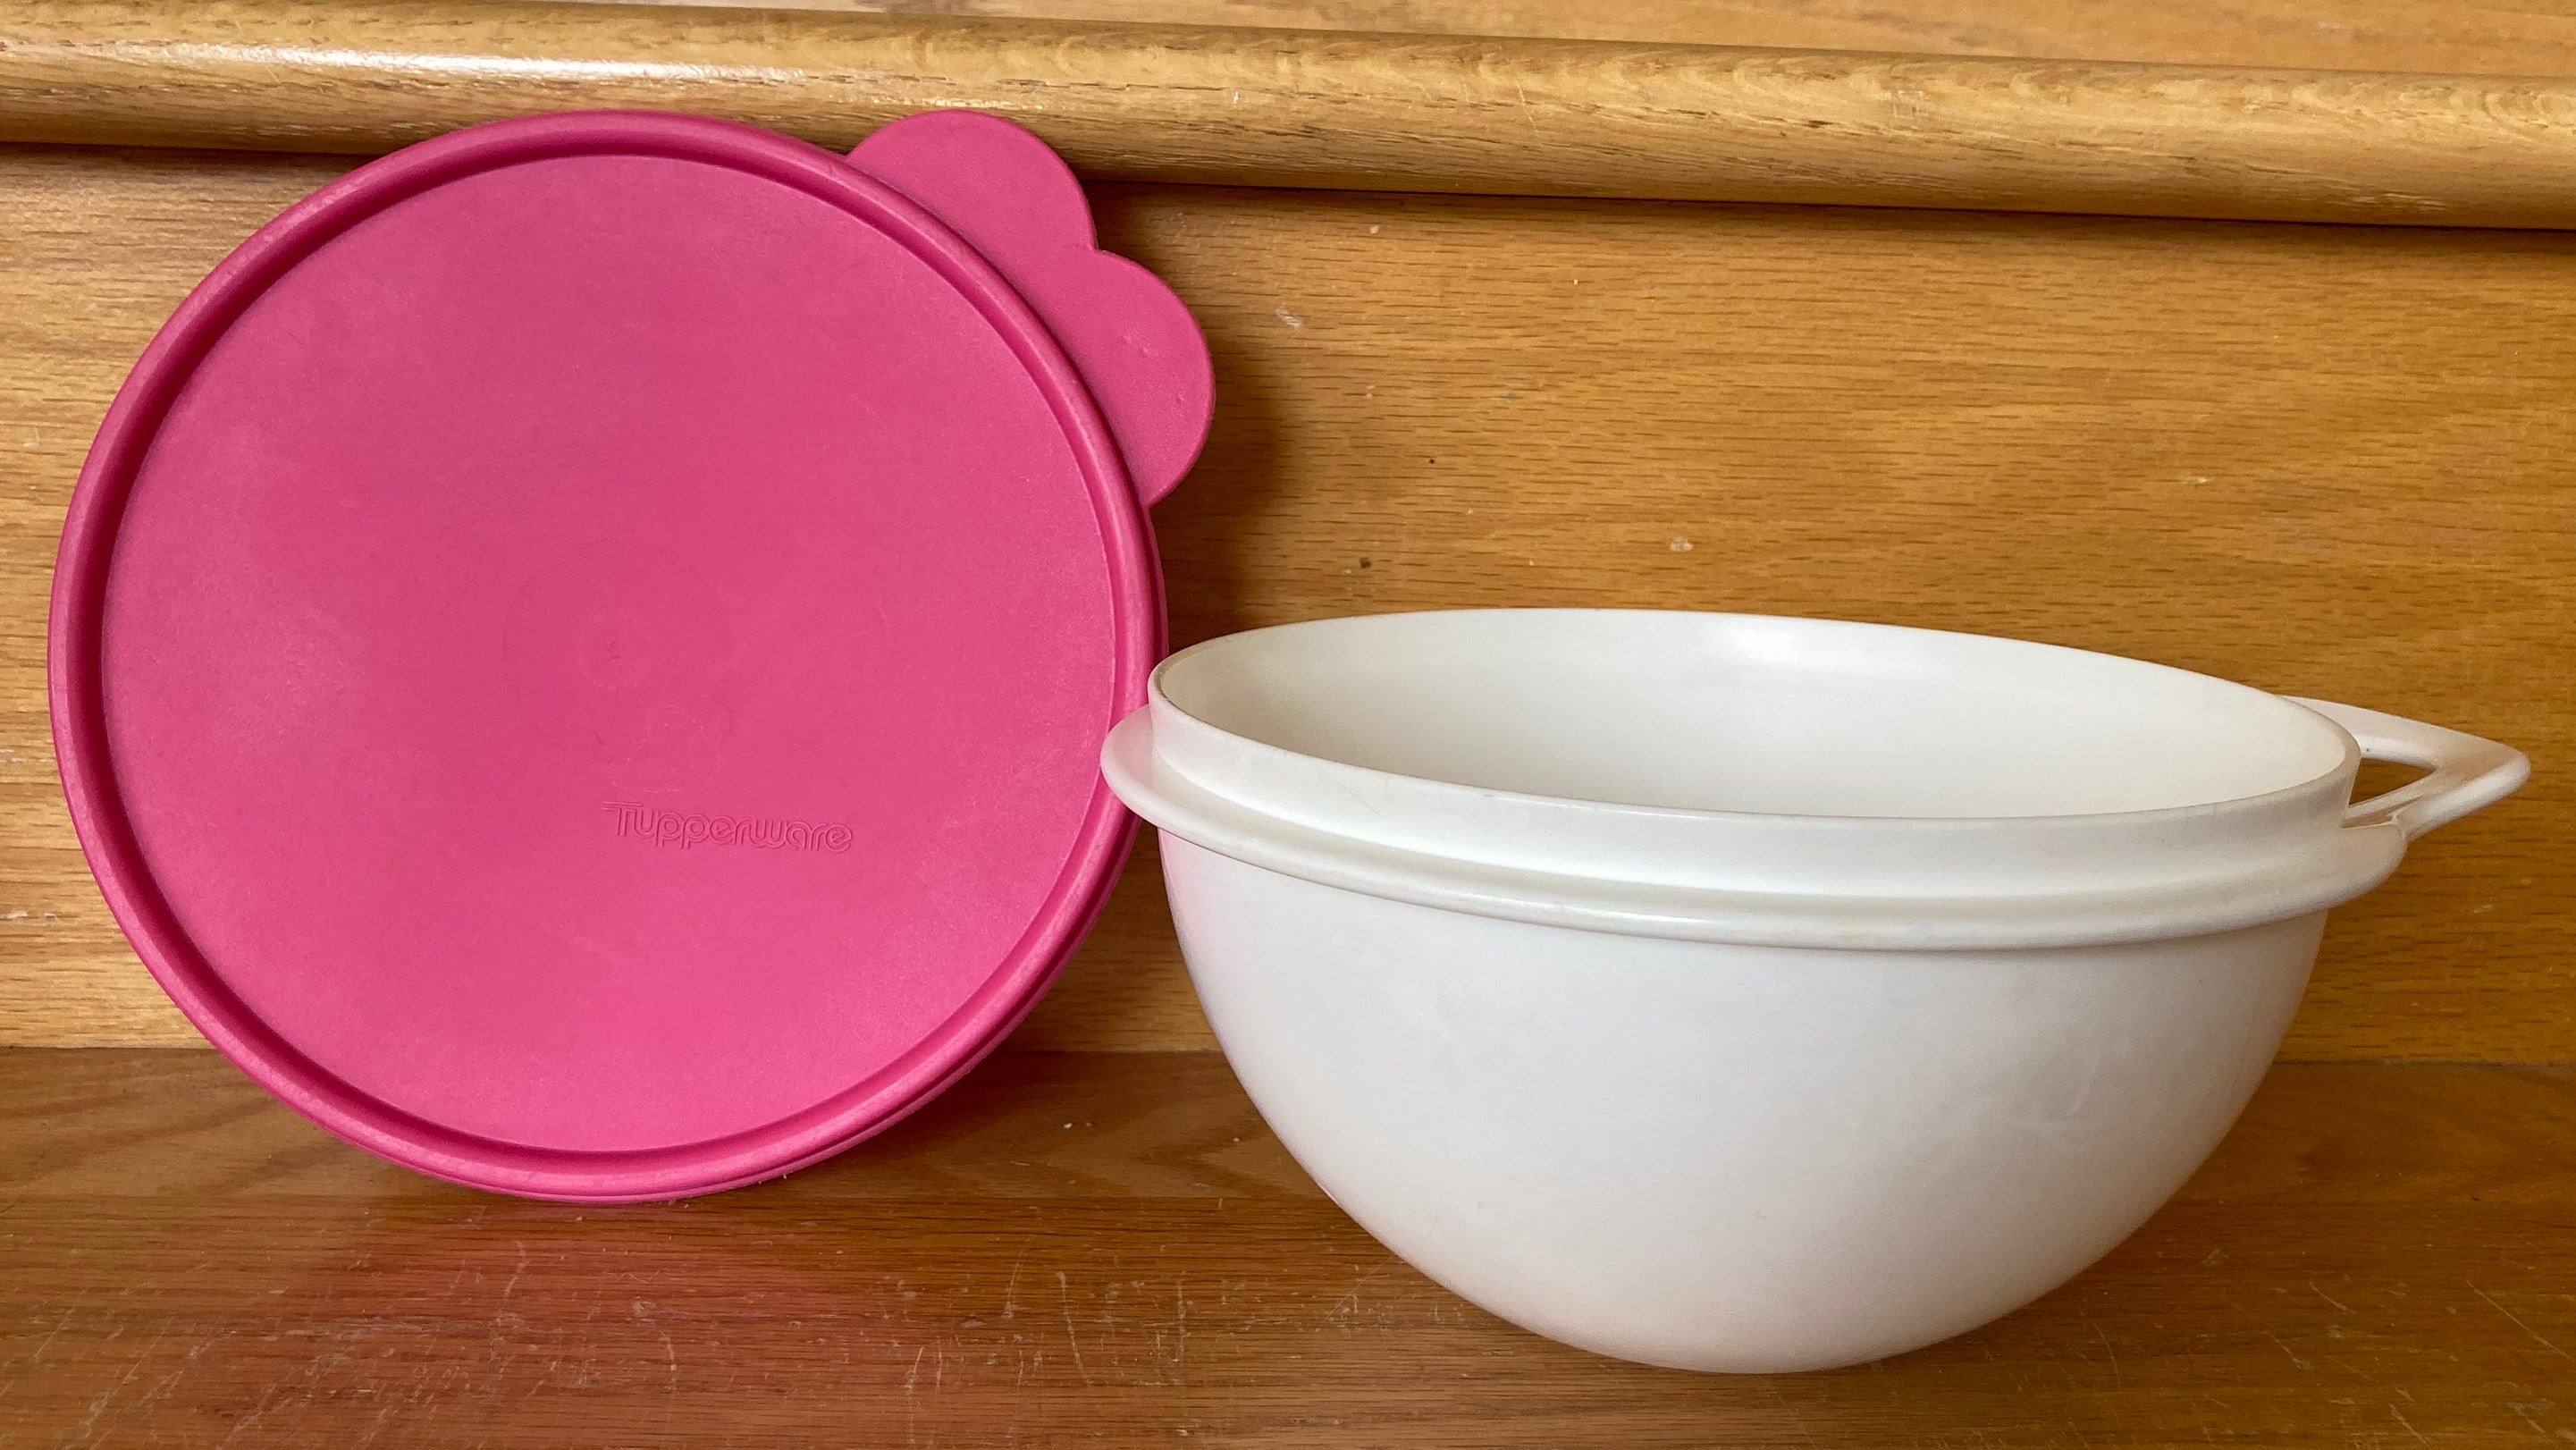 TUPPERWARE 19-C THATS A BOWL MEDIUM CONFIDENT PINK WHITE TABBED